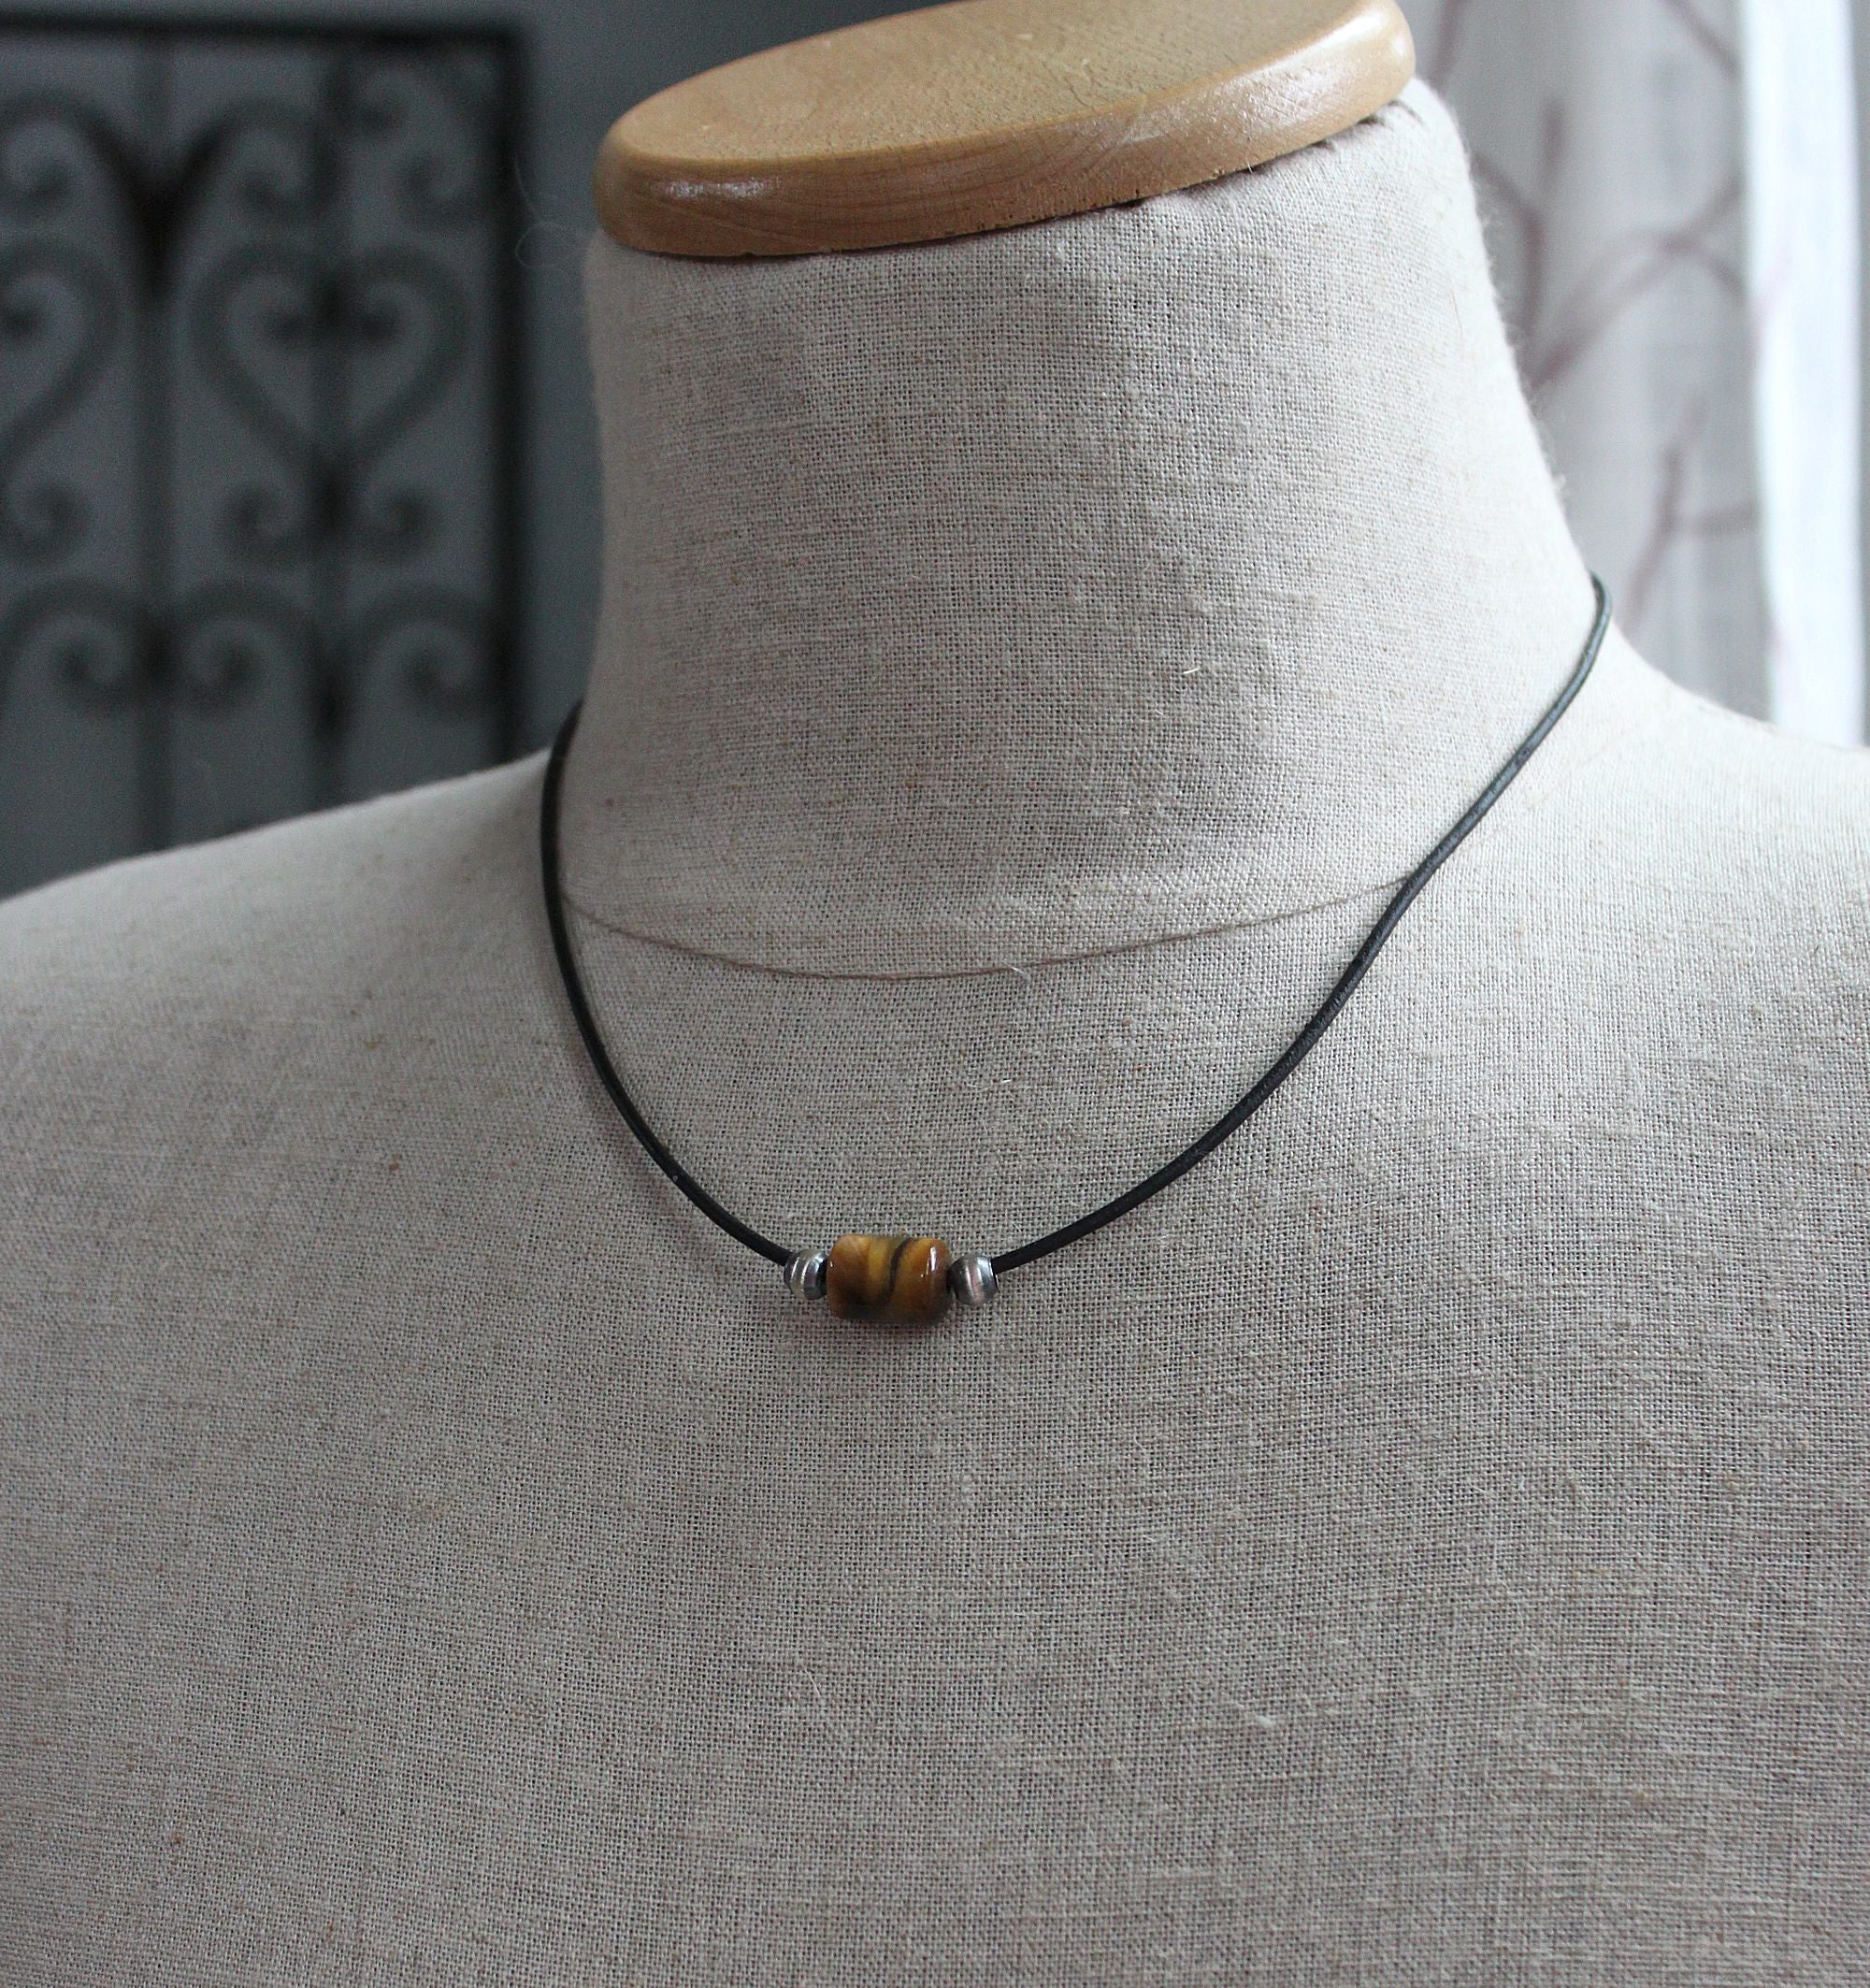 Buy Tiger Eye Necklace Mens Necklace Beaded Necklace Tribal Necklace Good  Luck Confidence Online in India - Etsy